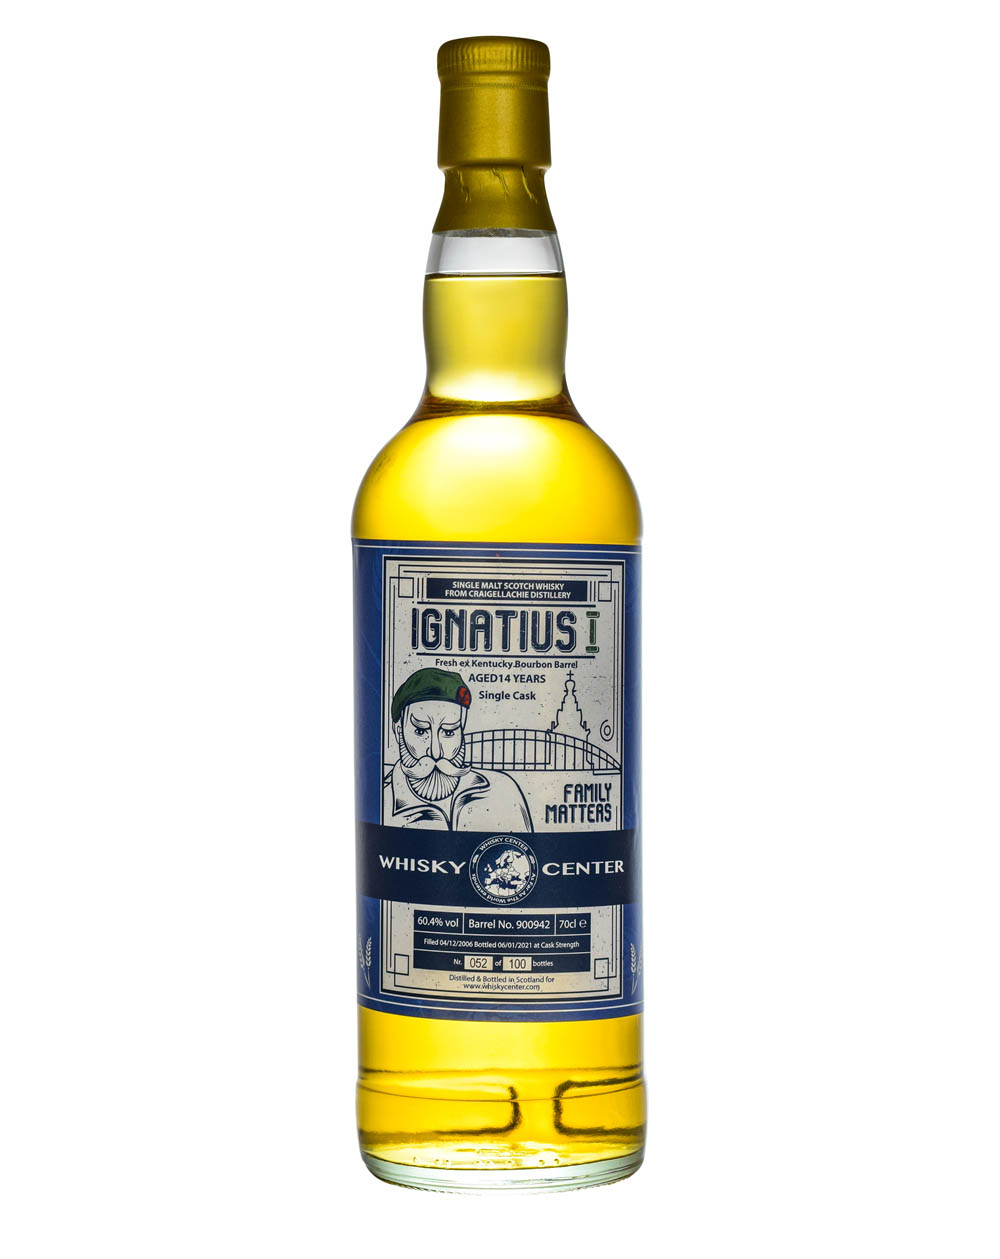 Craigellachie Ignatus 14 Years Old Whisky Center Musthave Malts MHM